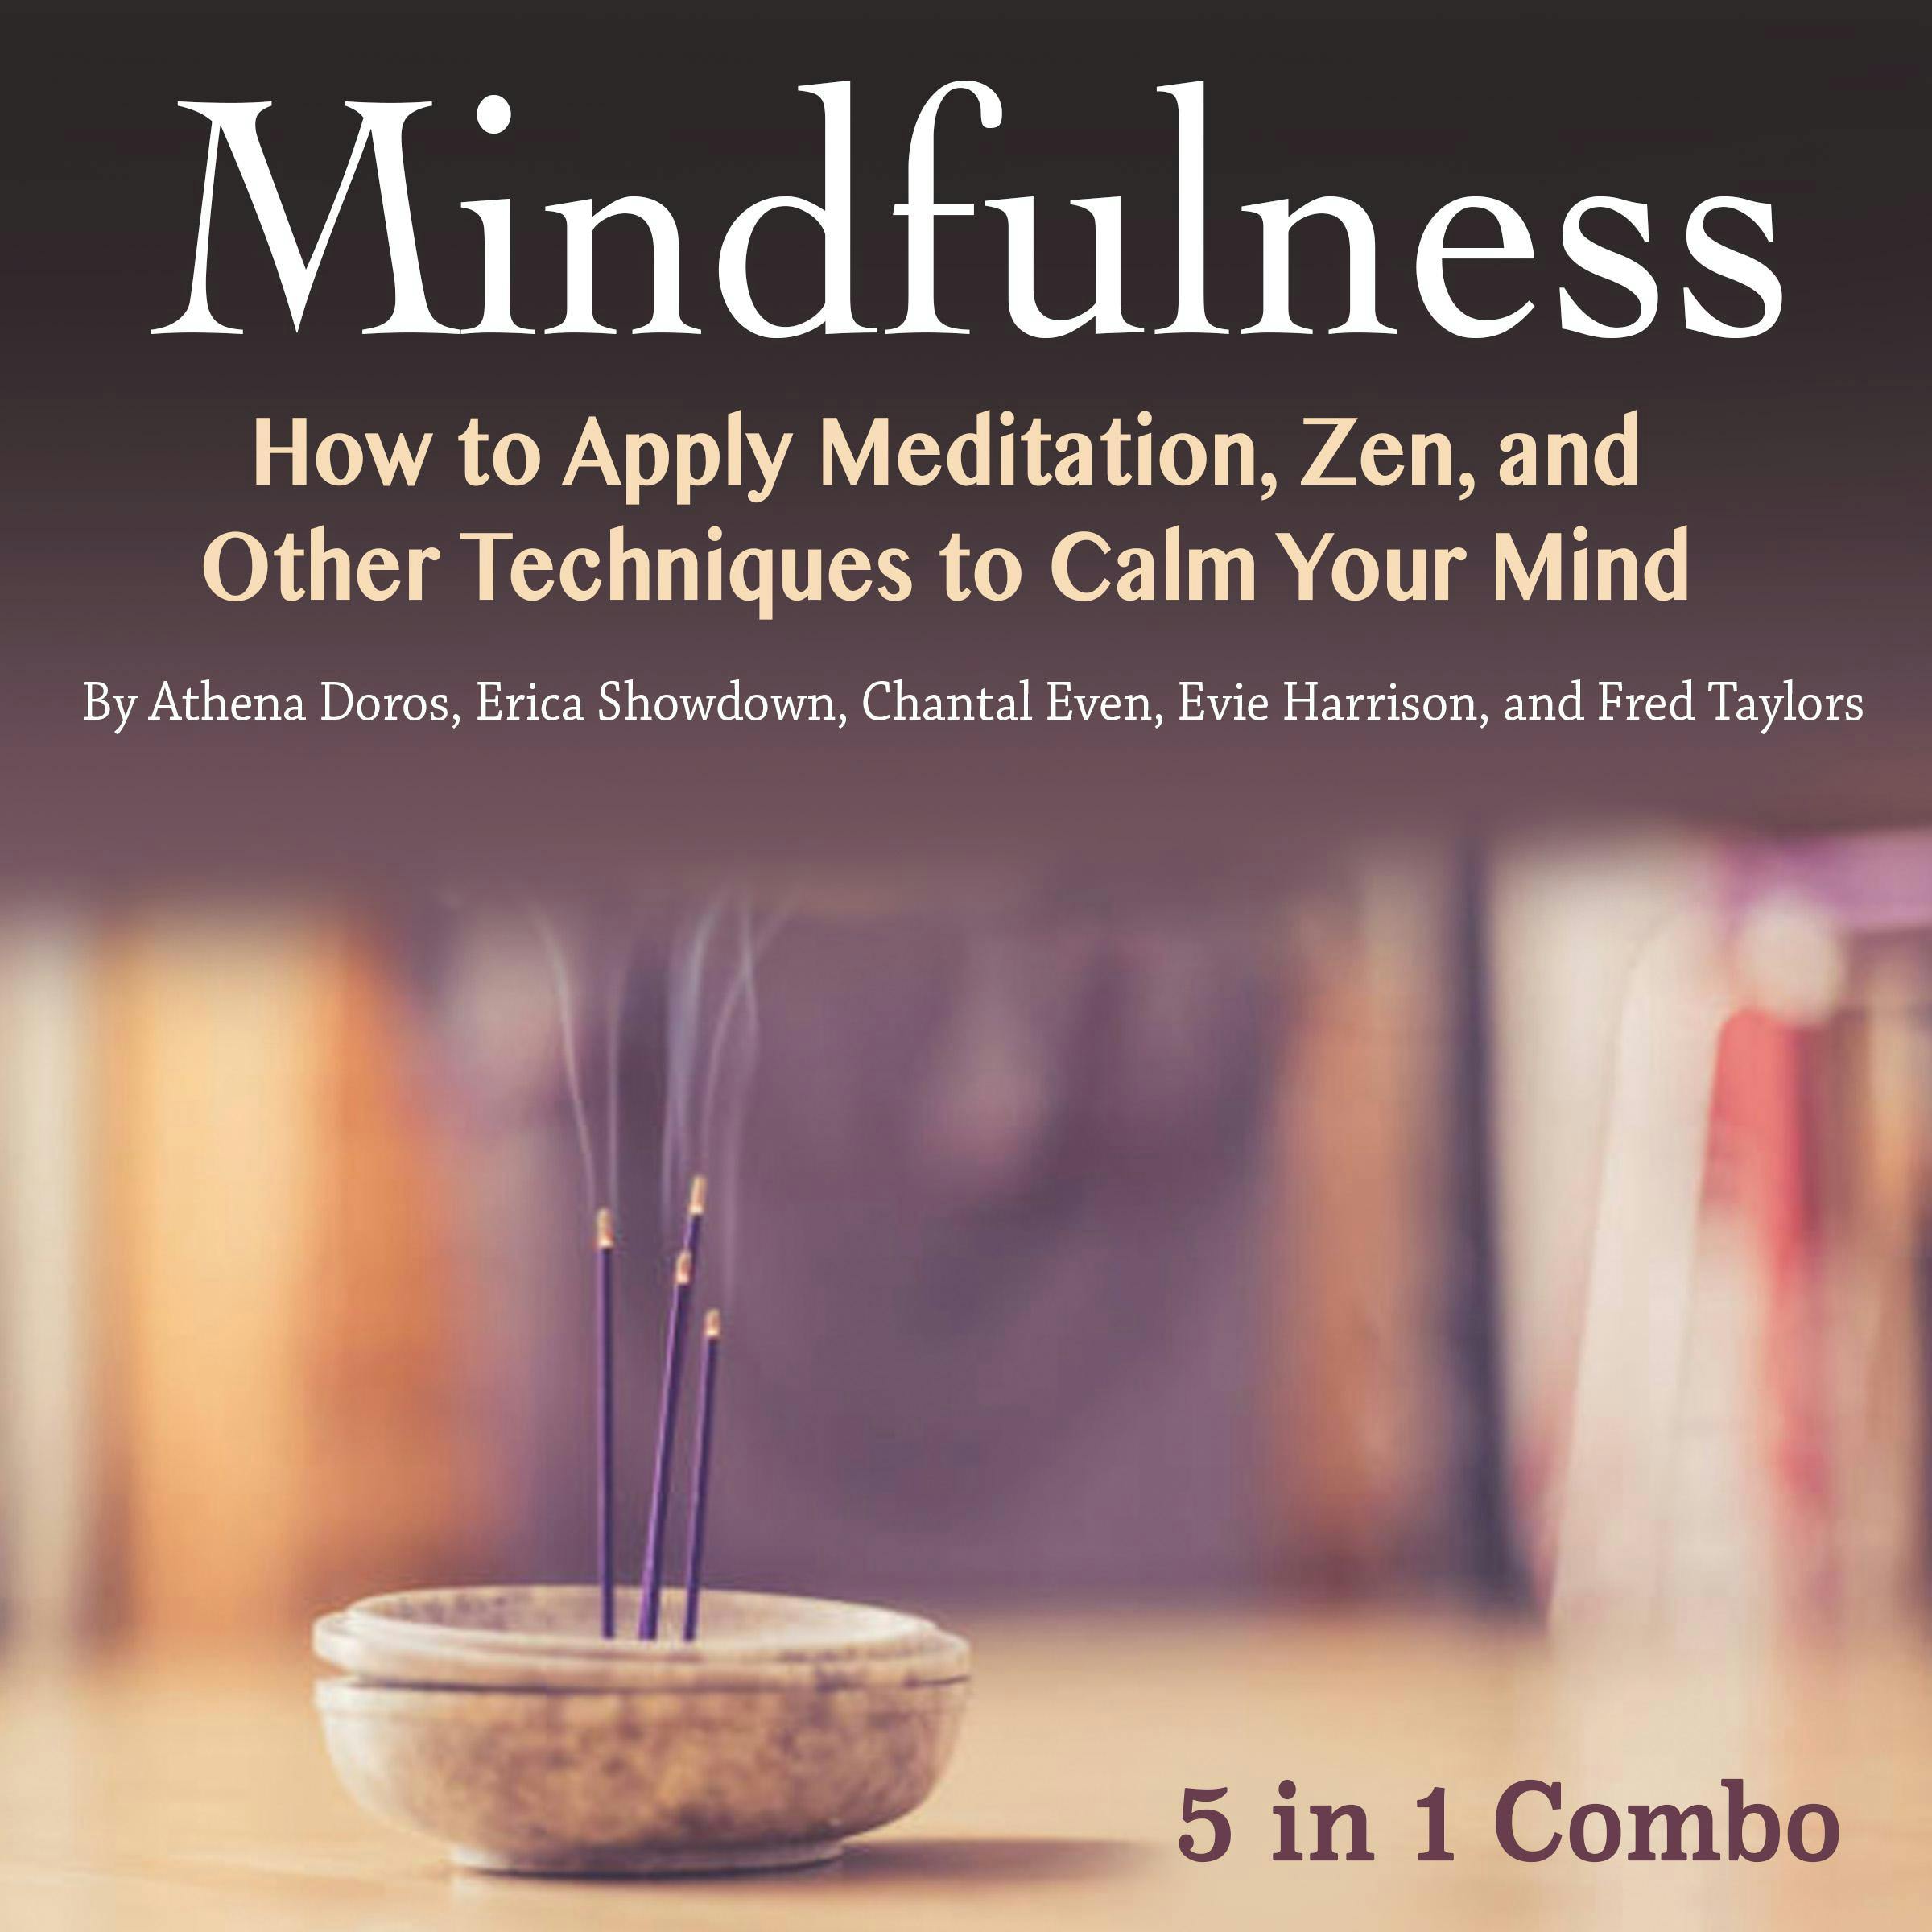 Mindfulness: How to Apply Meditation, Zen, and Other Techniques to Calm Your Mind - Athena Doros, Fred Taylors, Erica Showdown, Chantal Even, Evie Harrison